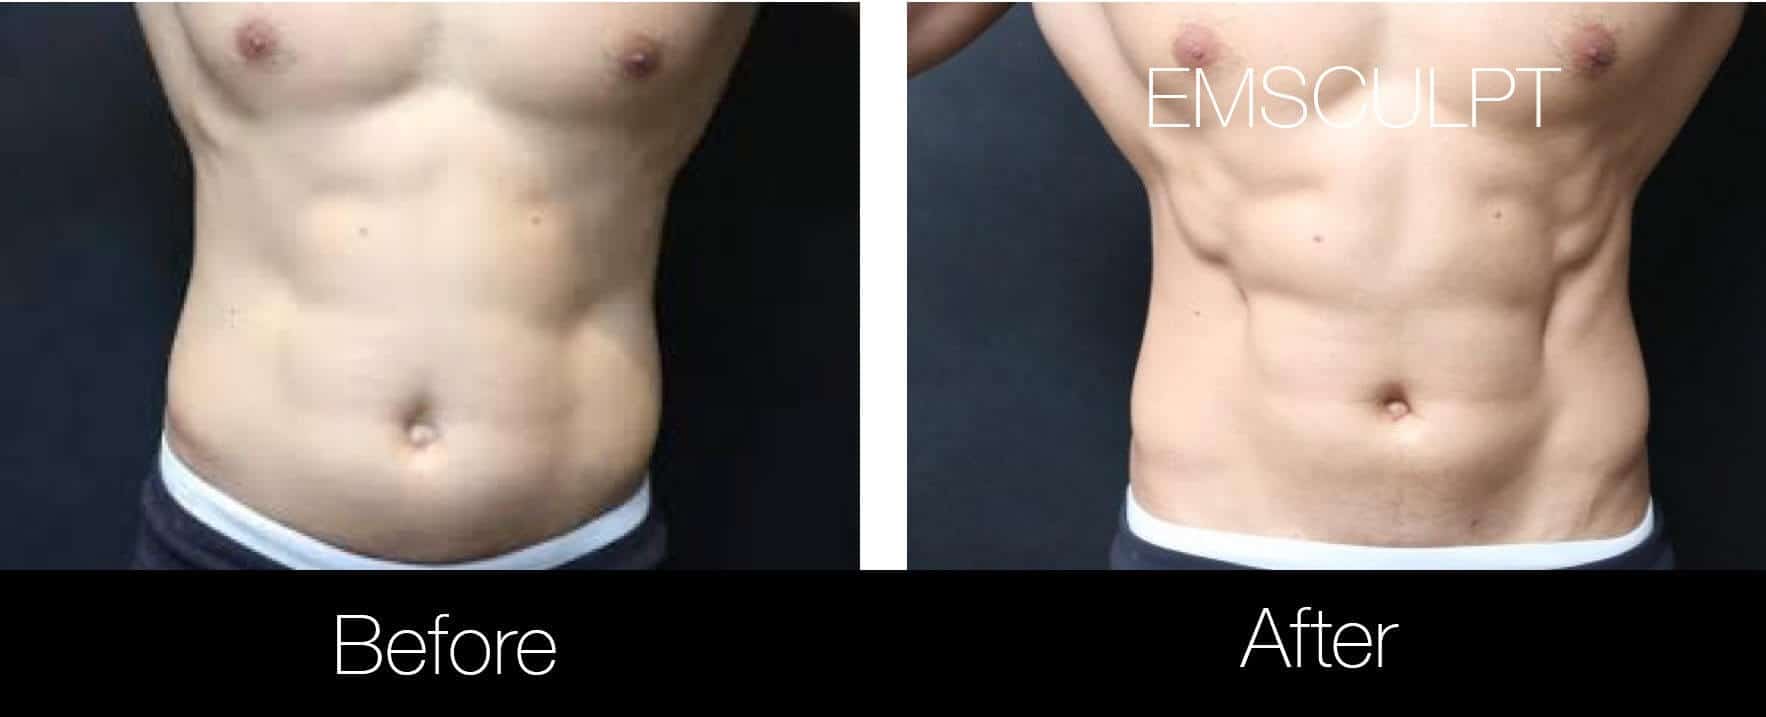 EMsculpt Treatment in Toronto - See Our Before & Afters!